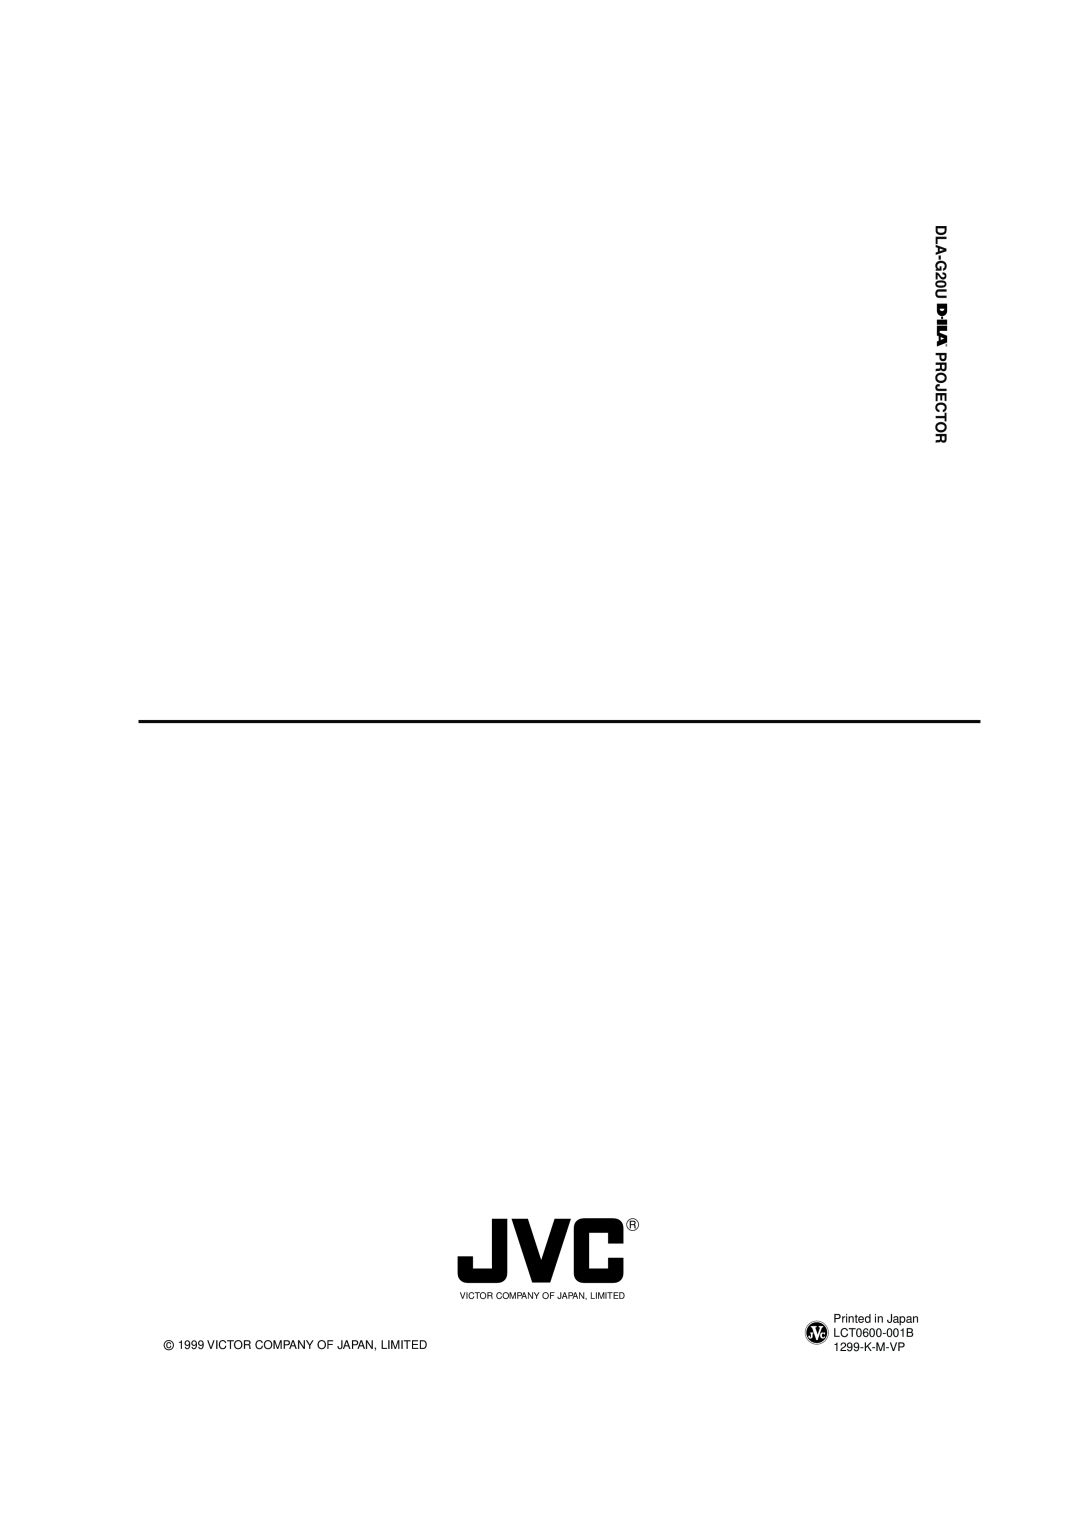 JVC manual DLA-G20U PROJECTOR, Printed in Japan, Victor Company Of Japan, Limited, LCT0600-001B, K-M-Vp 